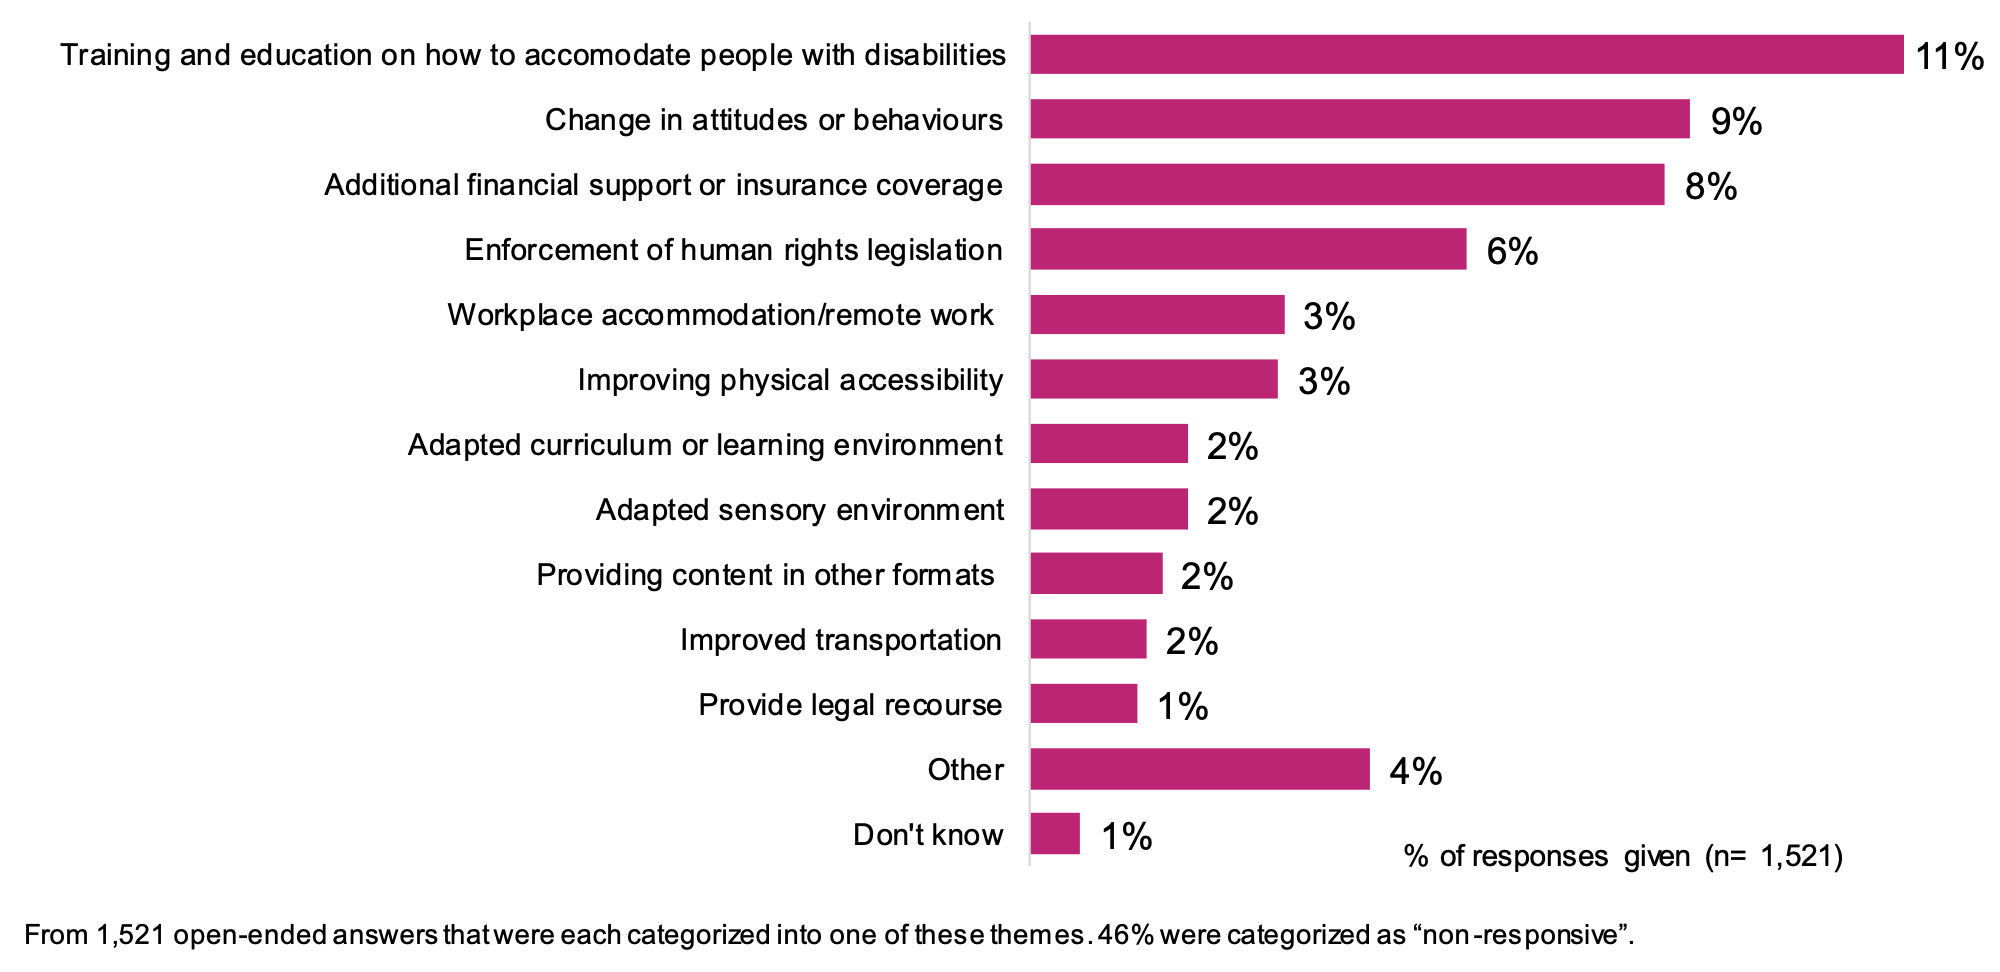 This is a bar chart of examples of ways discrimination experienced by survey respondents could have been avoided.